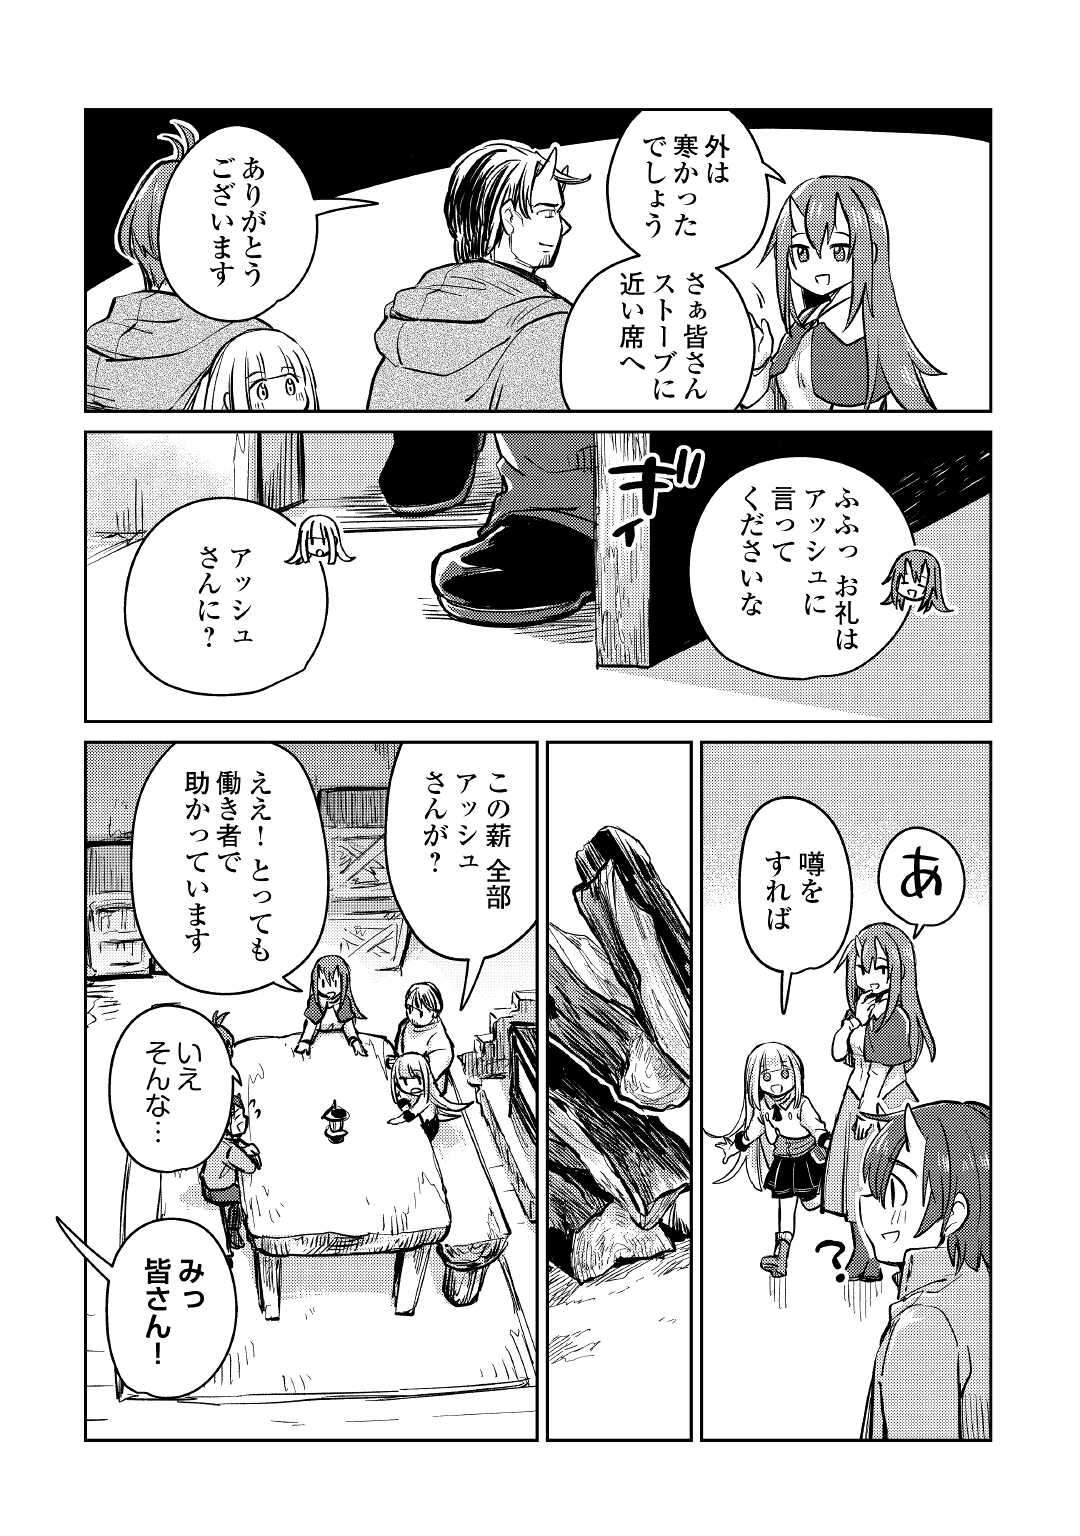 The Former Structural Researcher’s Story of Otherworldly Adventure 第35話 - Page 10